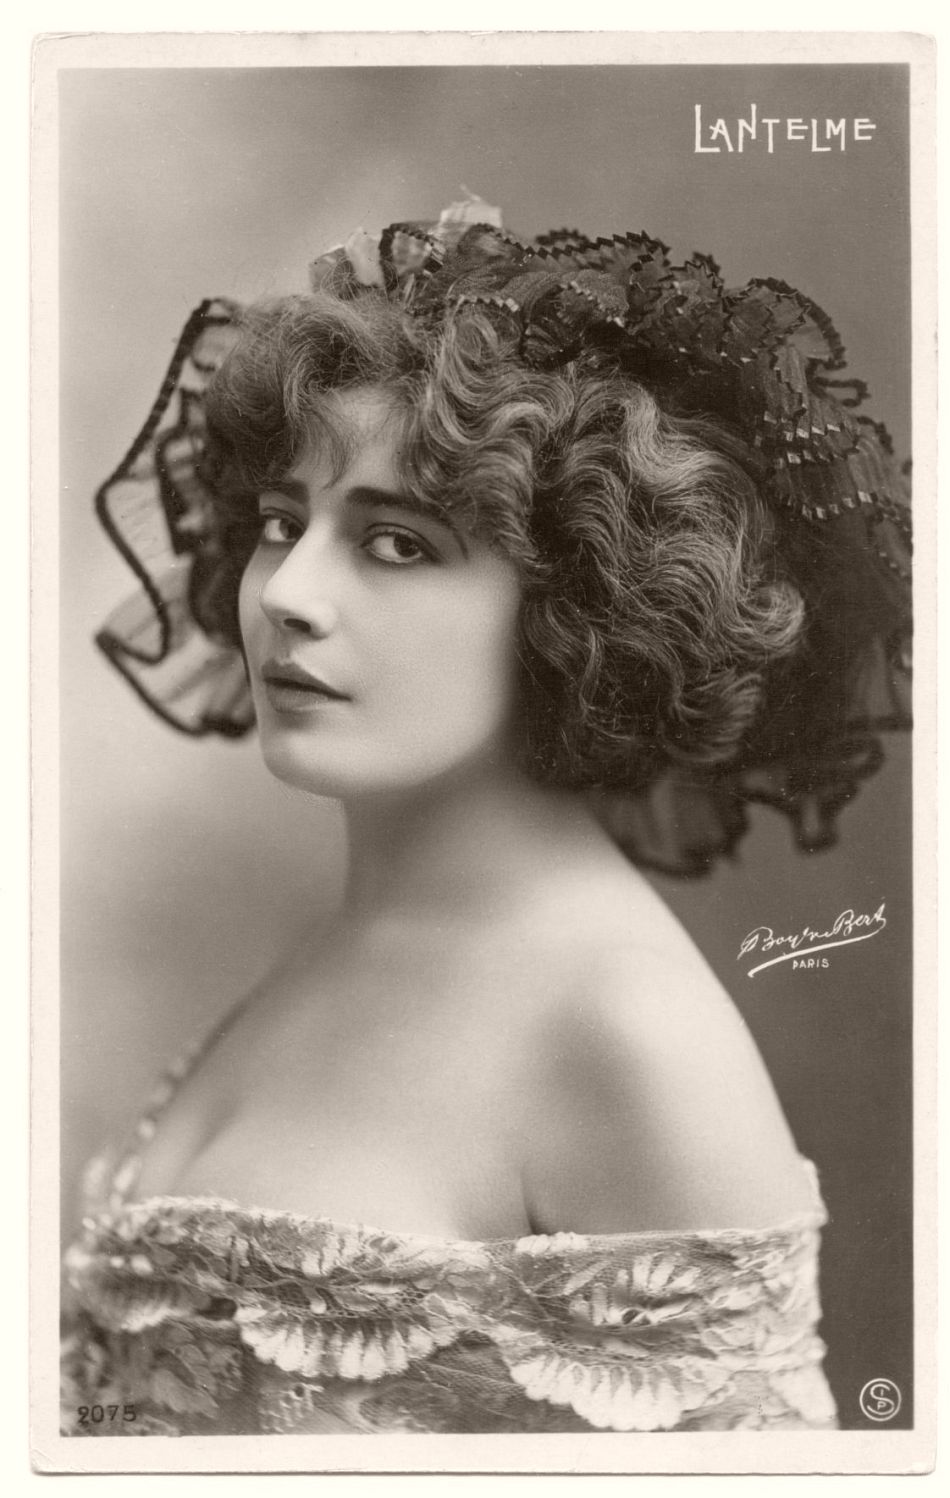 Geneviève "Ginette" Lantelme (born Mathilde Hortense Claire Fossey, 1883) was a French stage actress, socialite, fashion icon, and courtesan. Considered by her contemporaries to be one of the most beautiful women of the Belle Epoque and bearing a resemblance to American actress Ethel Barrymore, she is remembered for the mysterious circumstances of her death: on the night of July 24/25, 1911, she fell from the yacht of her husband, Alfred Edwards.